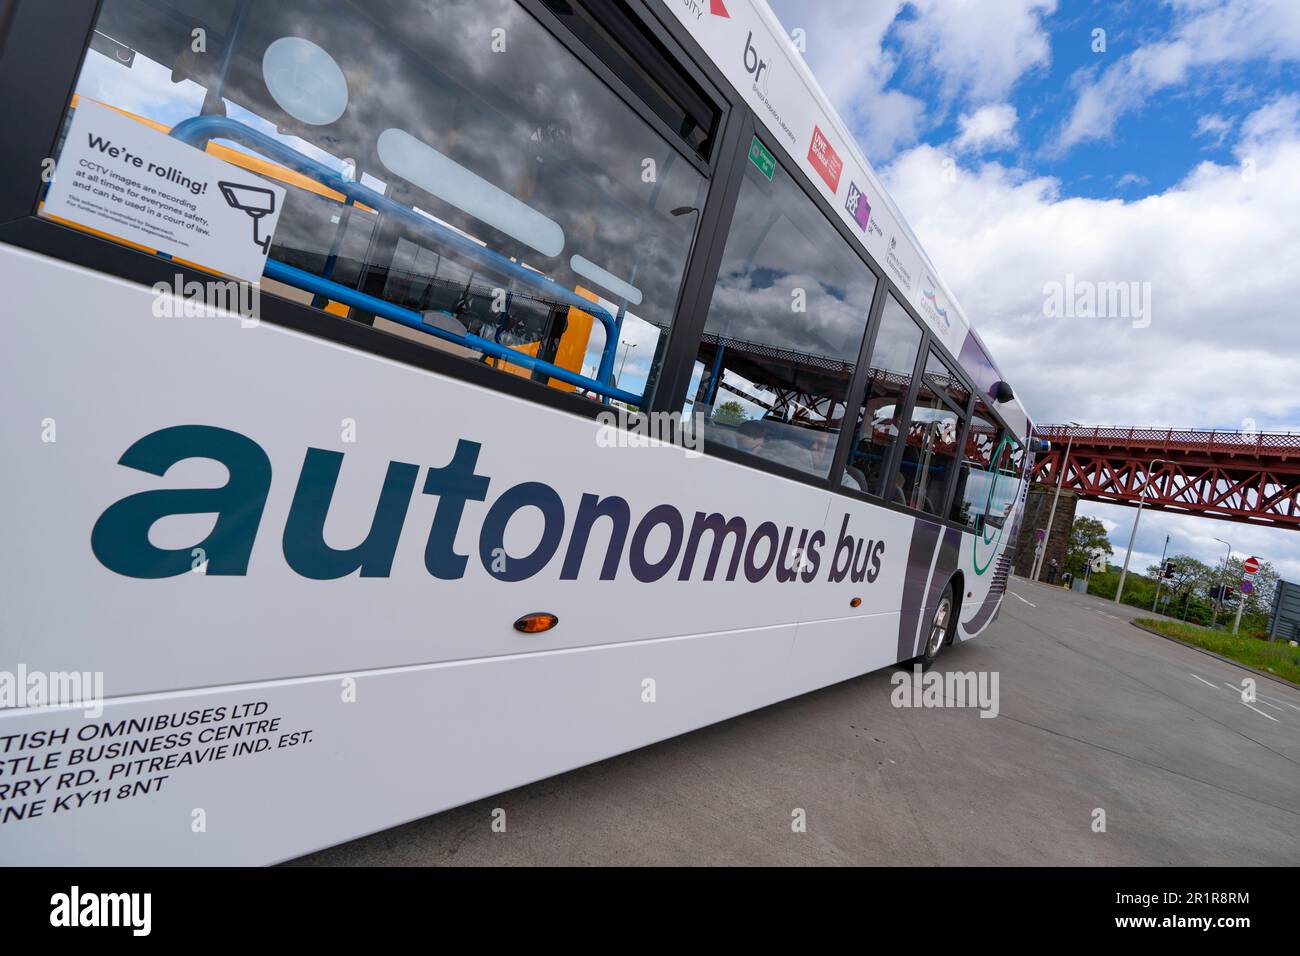 North Queensferry, Scotland, UK. 15 May 2023. Stagecoach autonomous self driving bus starts scheduled service between Ferrytoll Park and Ride at North Queensferry and Edinburgh Gate station in Edinburgh. The bus is the first full sized self driving passenger bus to operate in the UK. Initially the bus will only be autonomous on sections of motorway on the routs with the driver always ready to take control.. Iain Masterton/Alamy Live News Stock Photo